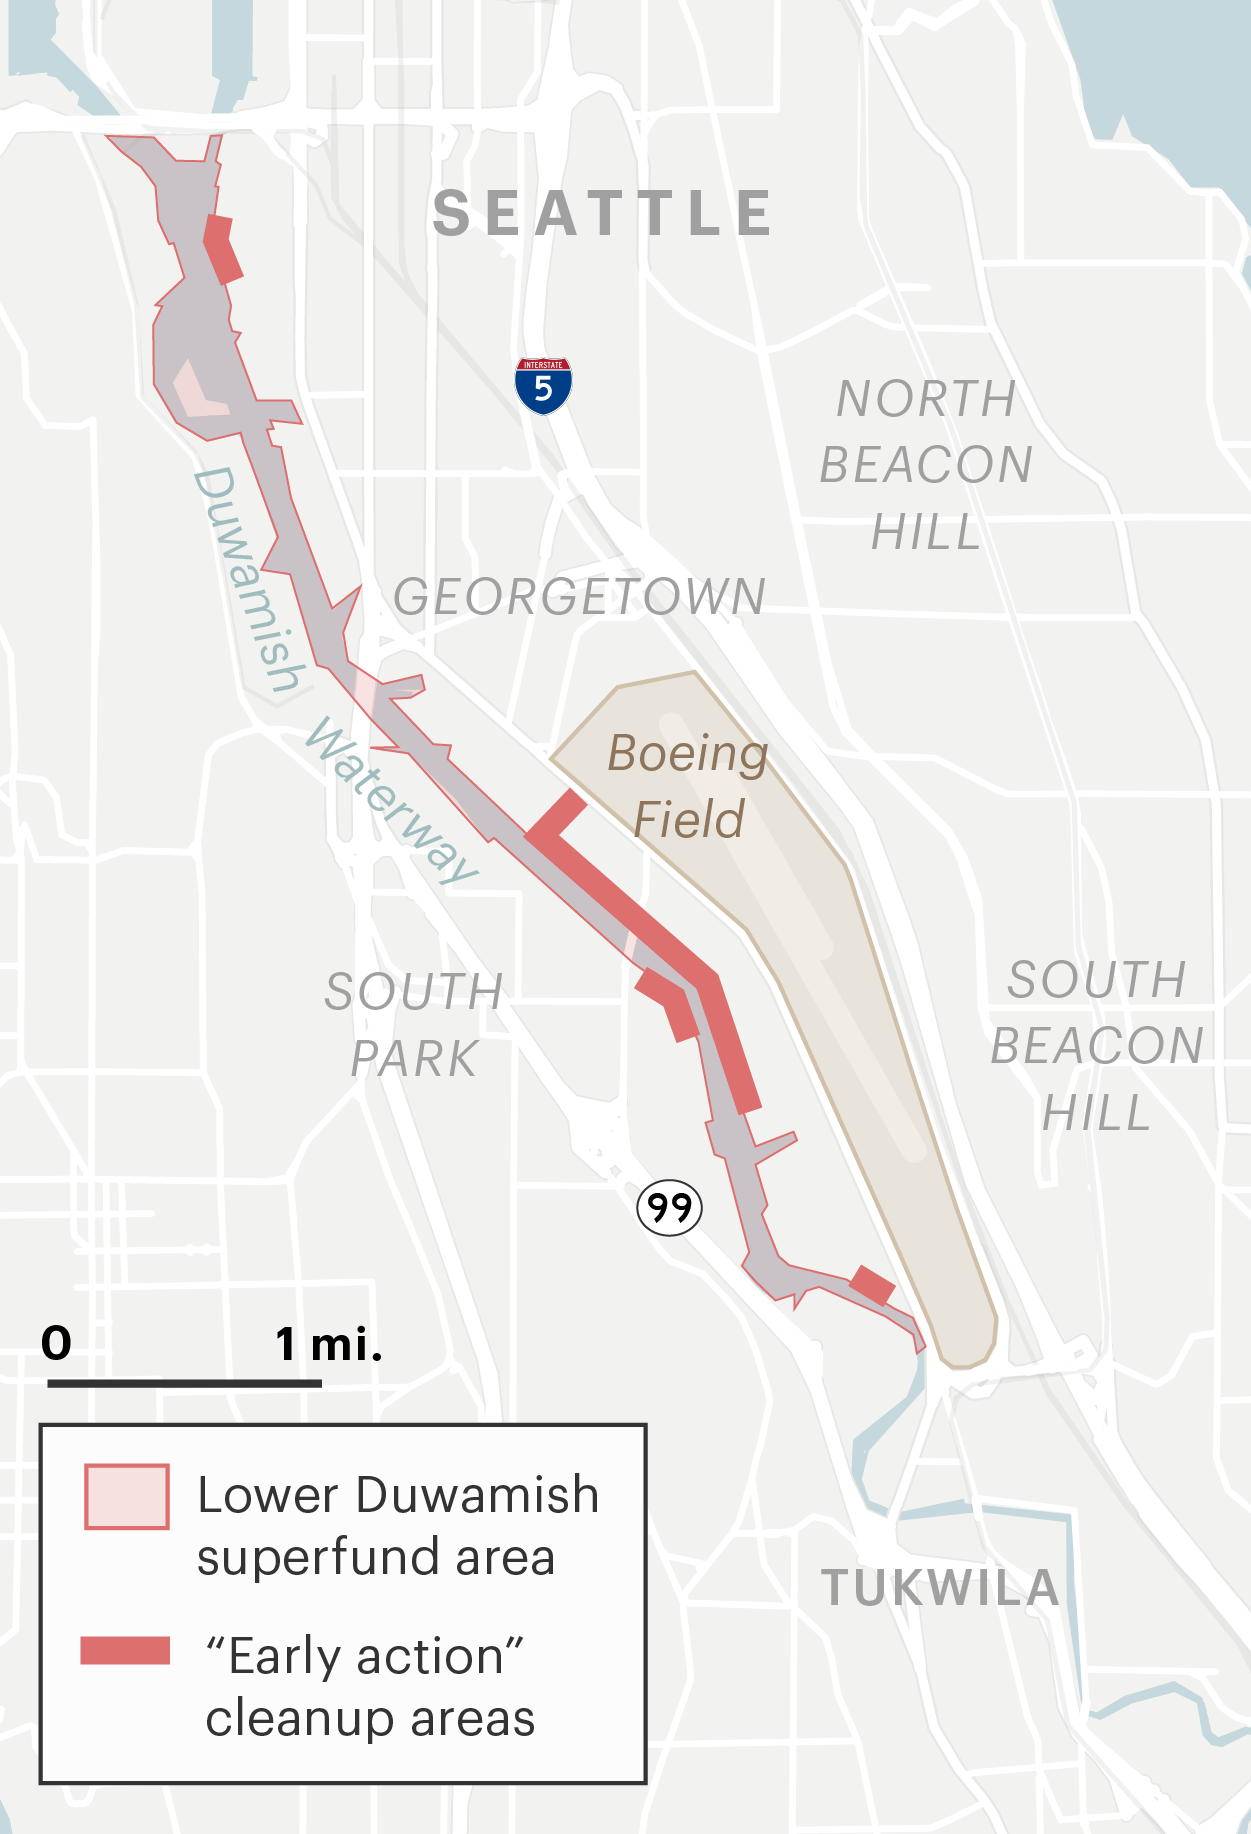 A map shows Duwamish Waterway in Seattle. Part of the waterway is outlined in red, indicating the entire superfund area. Smaller portions of the waterway are solid red, indicating the 